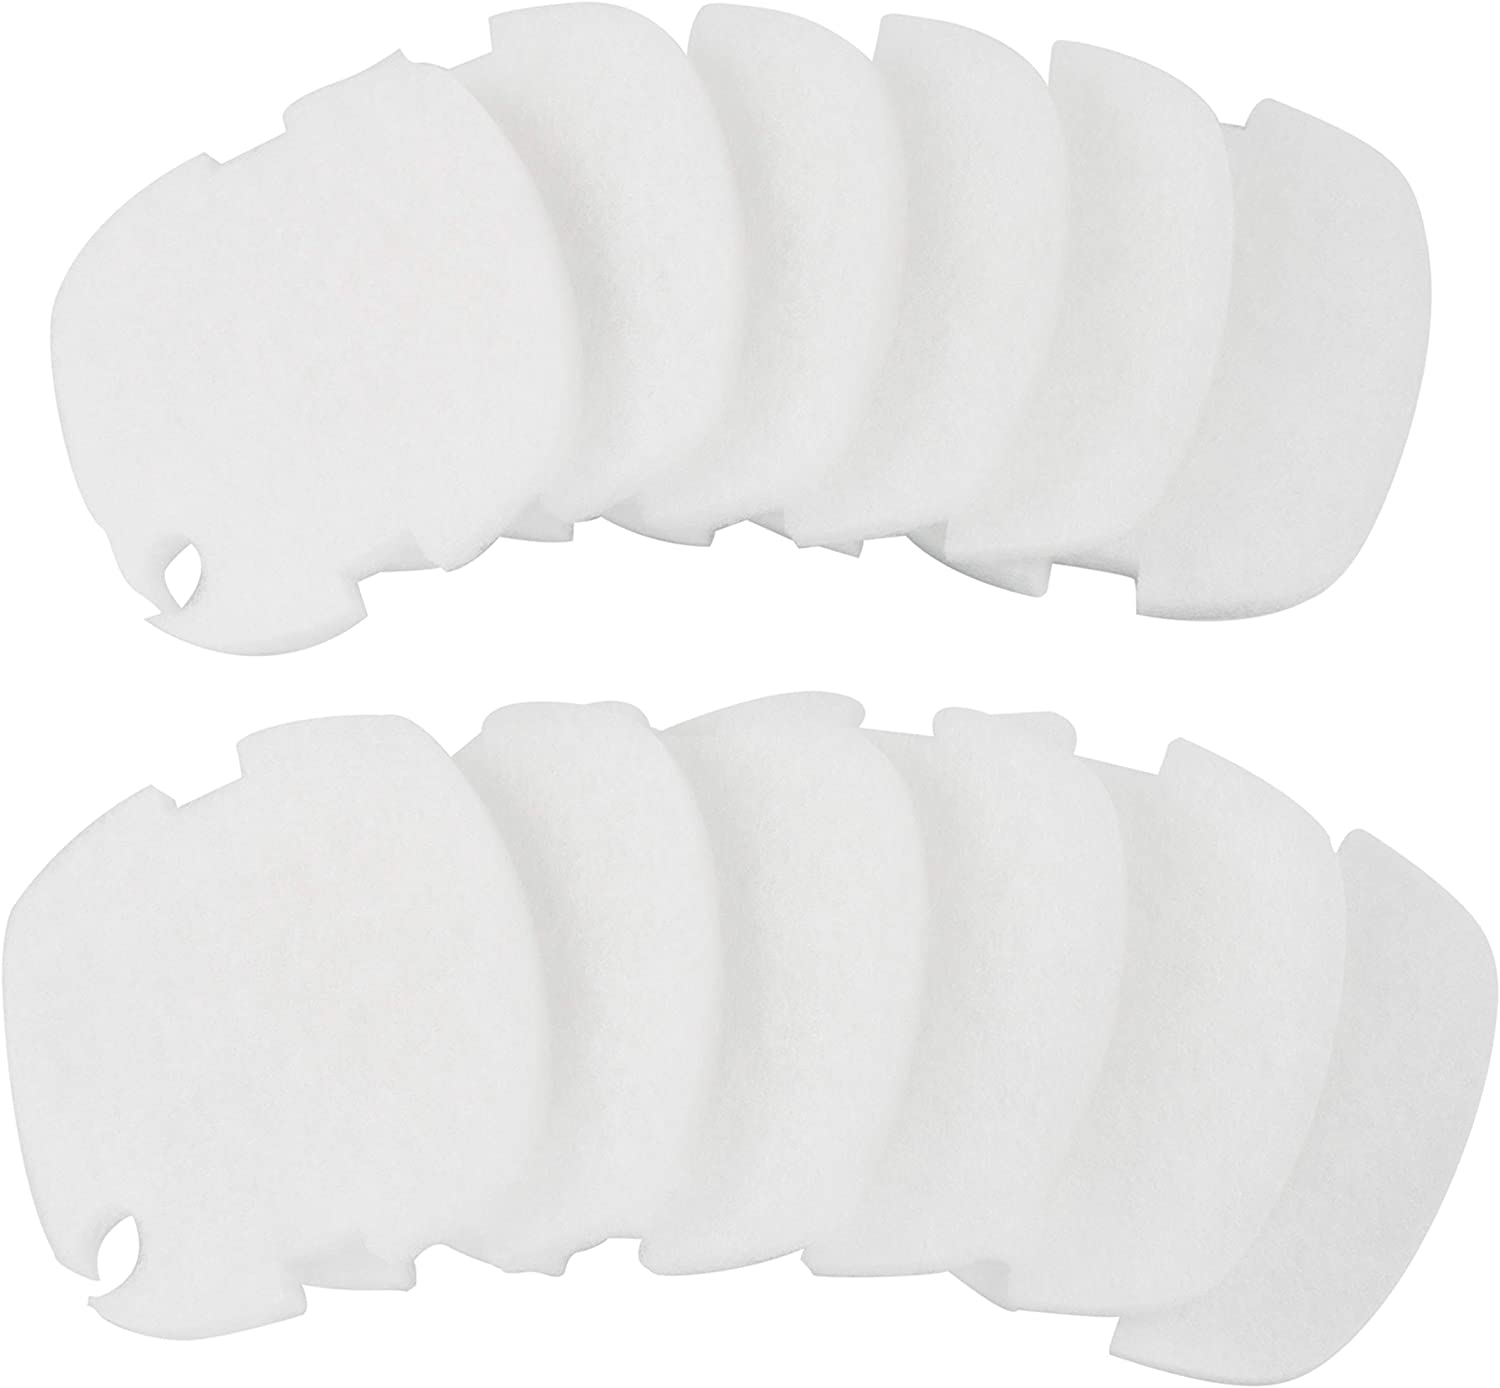 LTWHOME Replacement Polishing Filter Pads Fit for Marineland C-160 & C-220 Canister Filter (Pack of 12pcs)